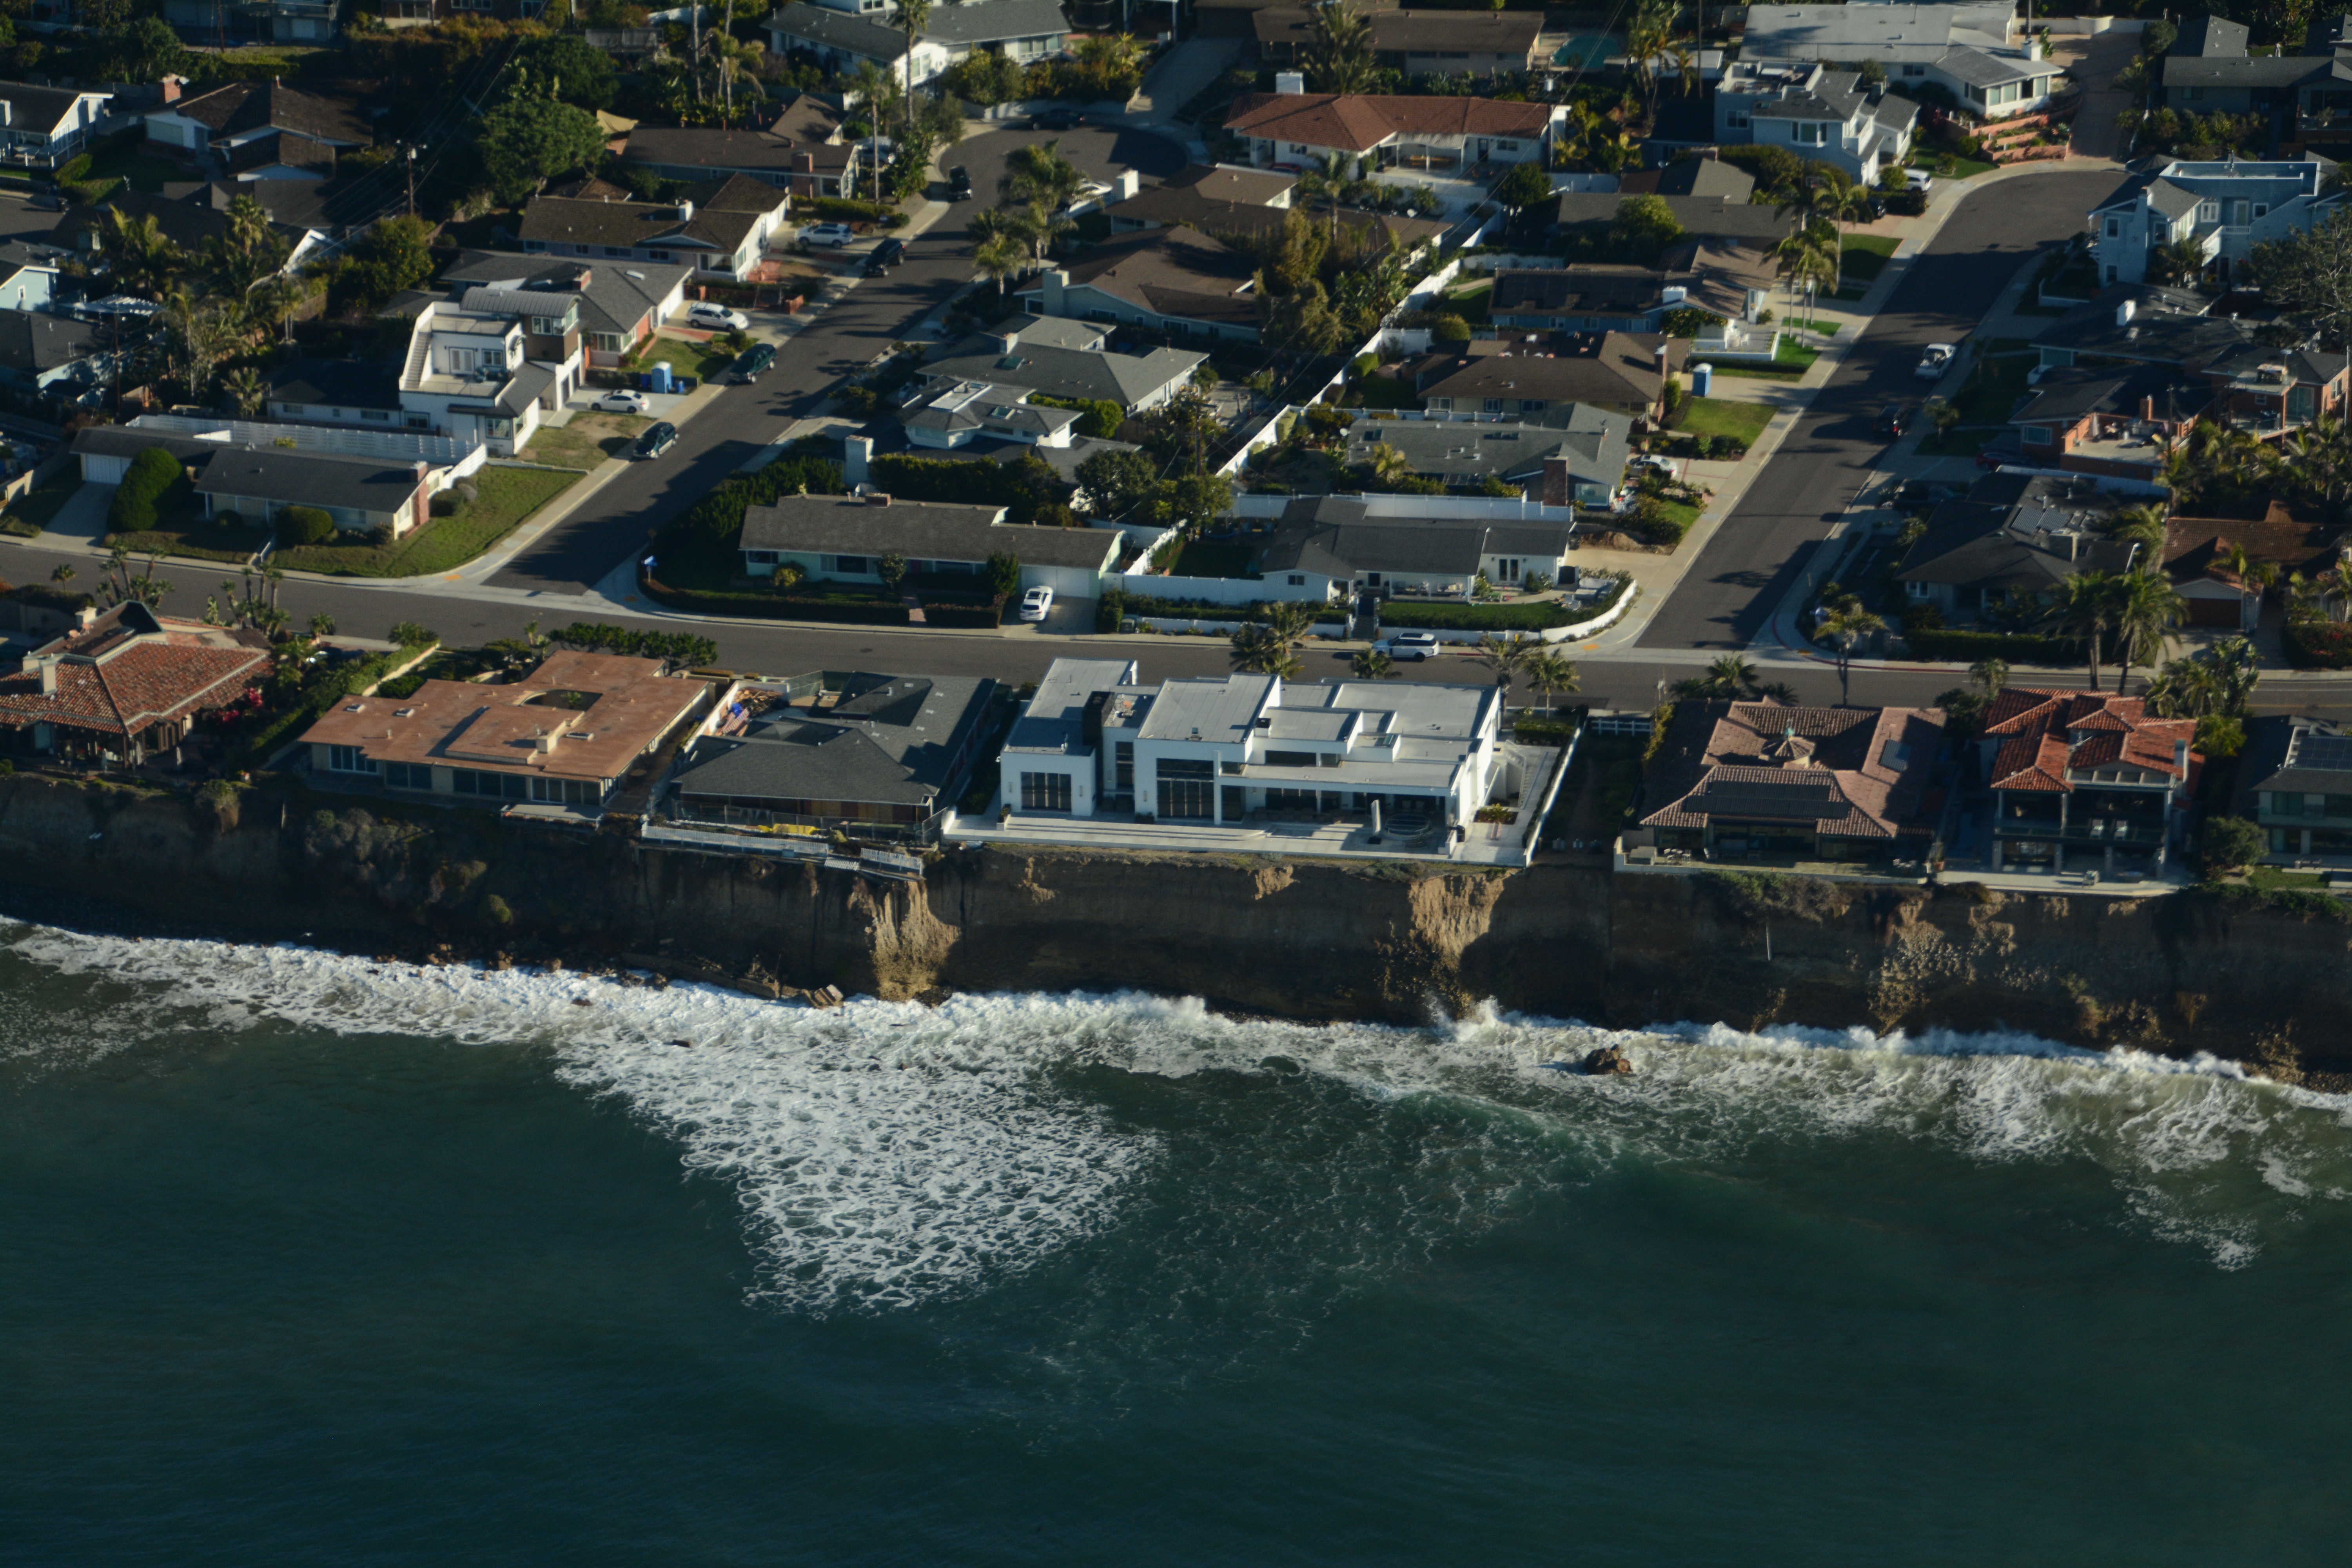 an aerial view from over the ocean looking towards rows of houses on the edge of the ocean bluff. Armored sea walls blocking waves from eroding the cliffs into more beach space.